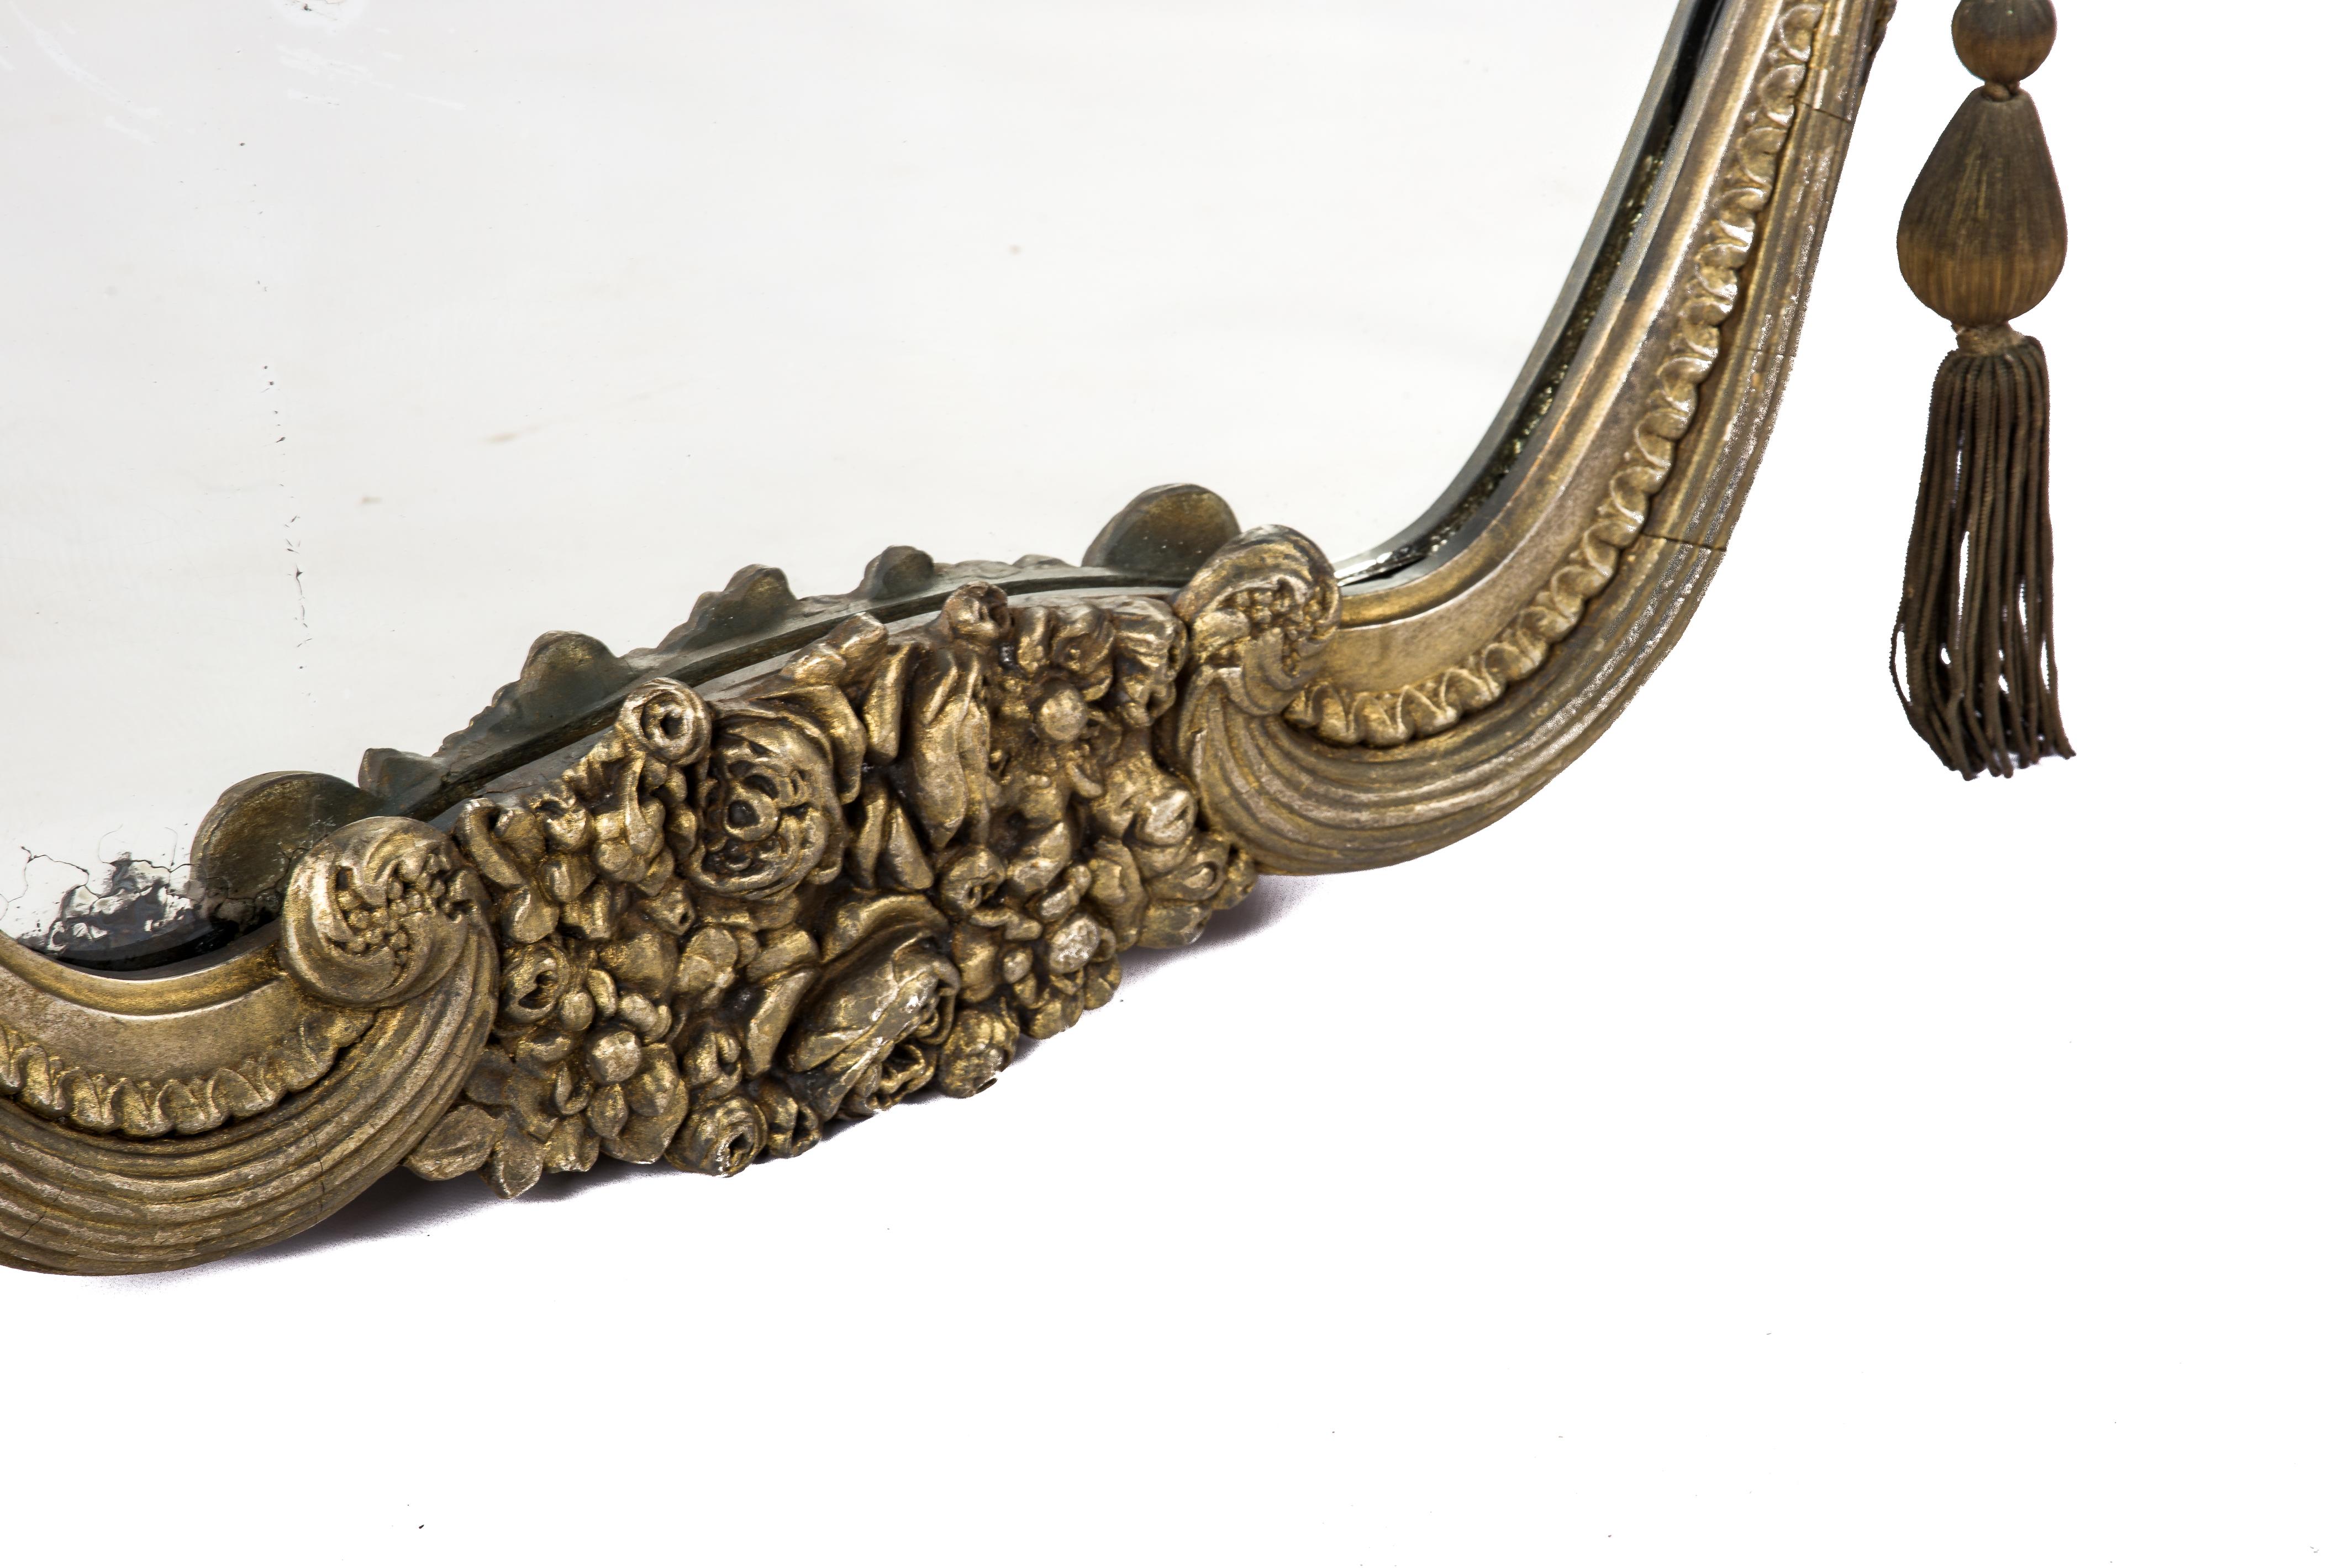 This beautiful and unique mirror was made in central France in the early 20th century, circa 1910. The mirror frame features a central group of flowers flanked by two scrolls. The frame has a solid pine base smoothened with gesso. It has a grey